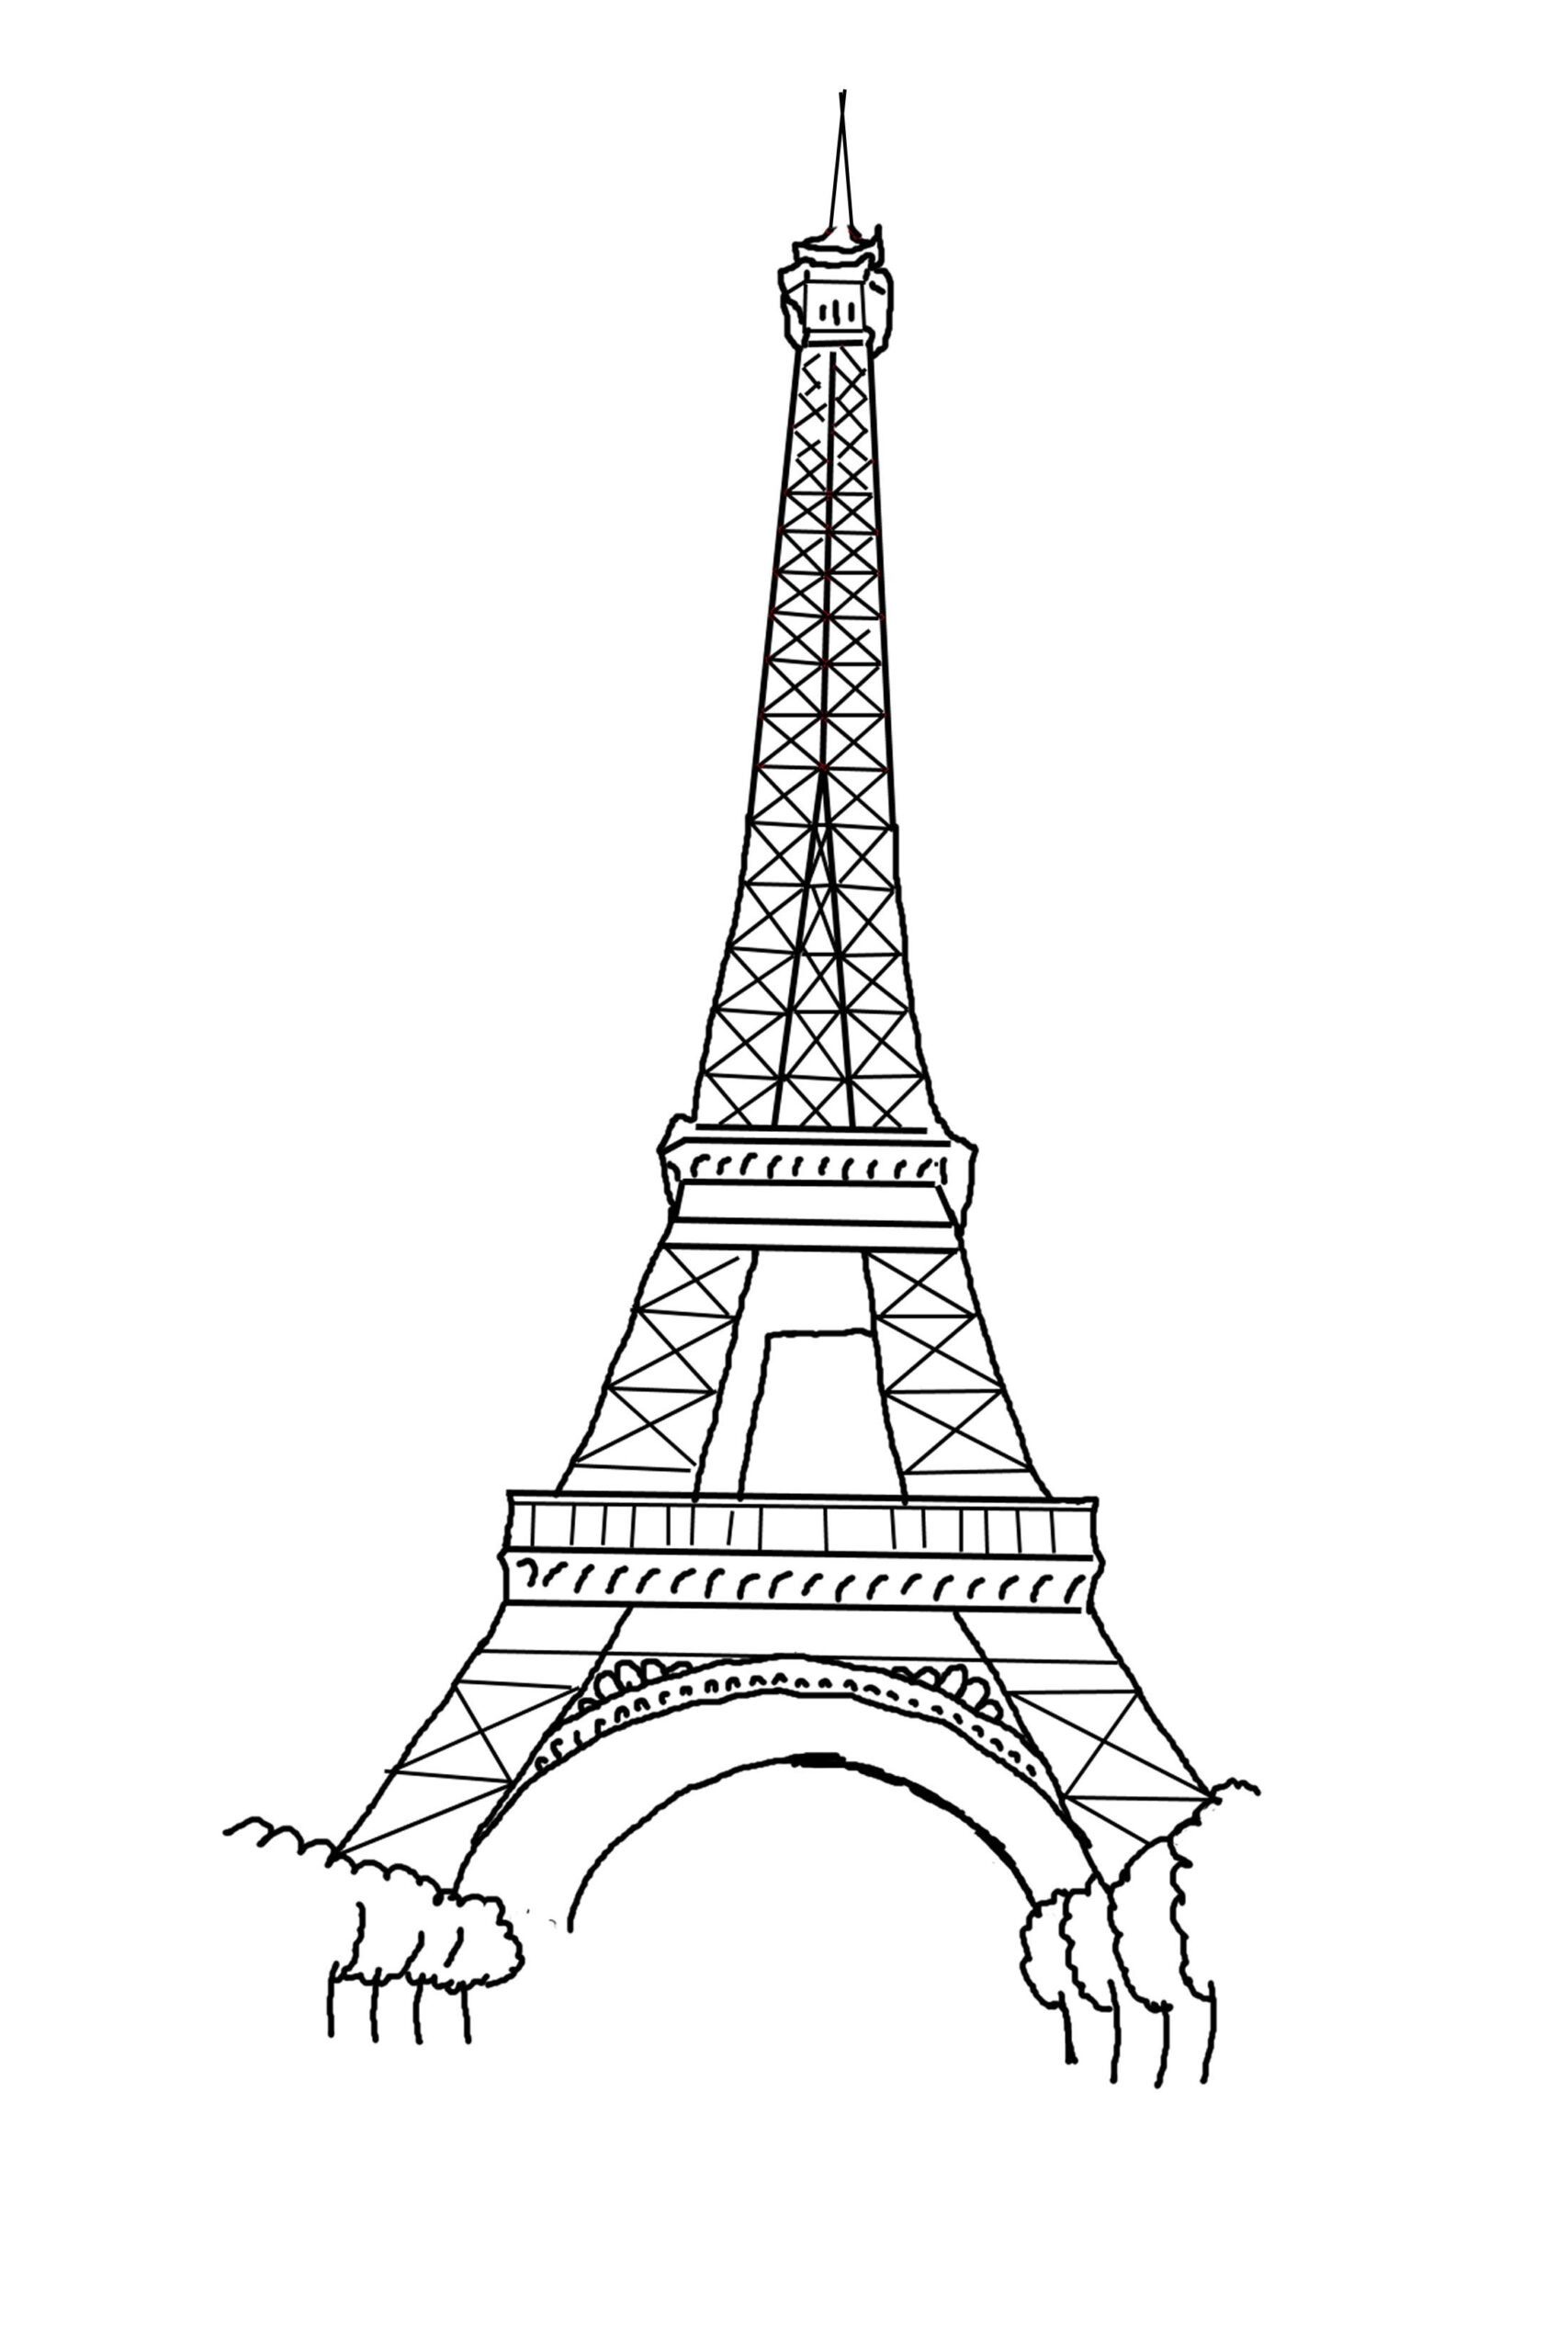 Eiffel Tower Coloring Pages This Kind Of Picture Is Available In Wide concernant Coloriage Tour Eiffel À Imprimer